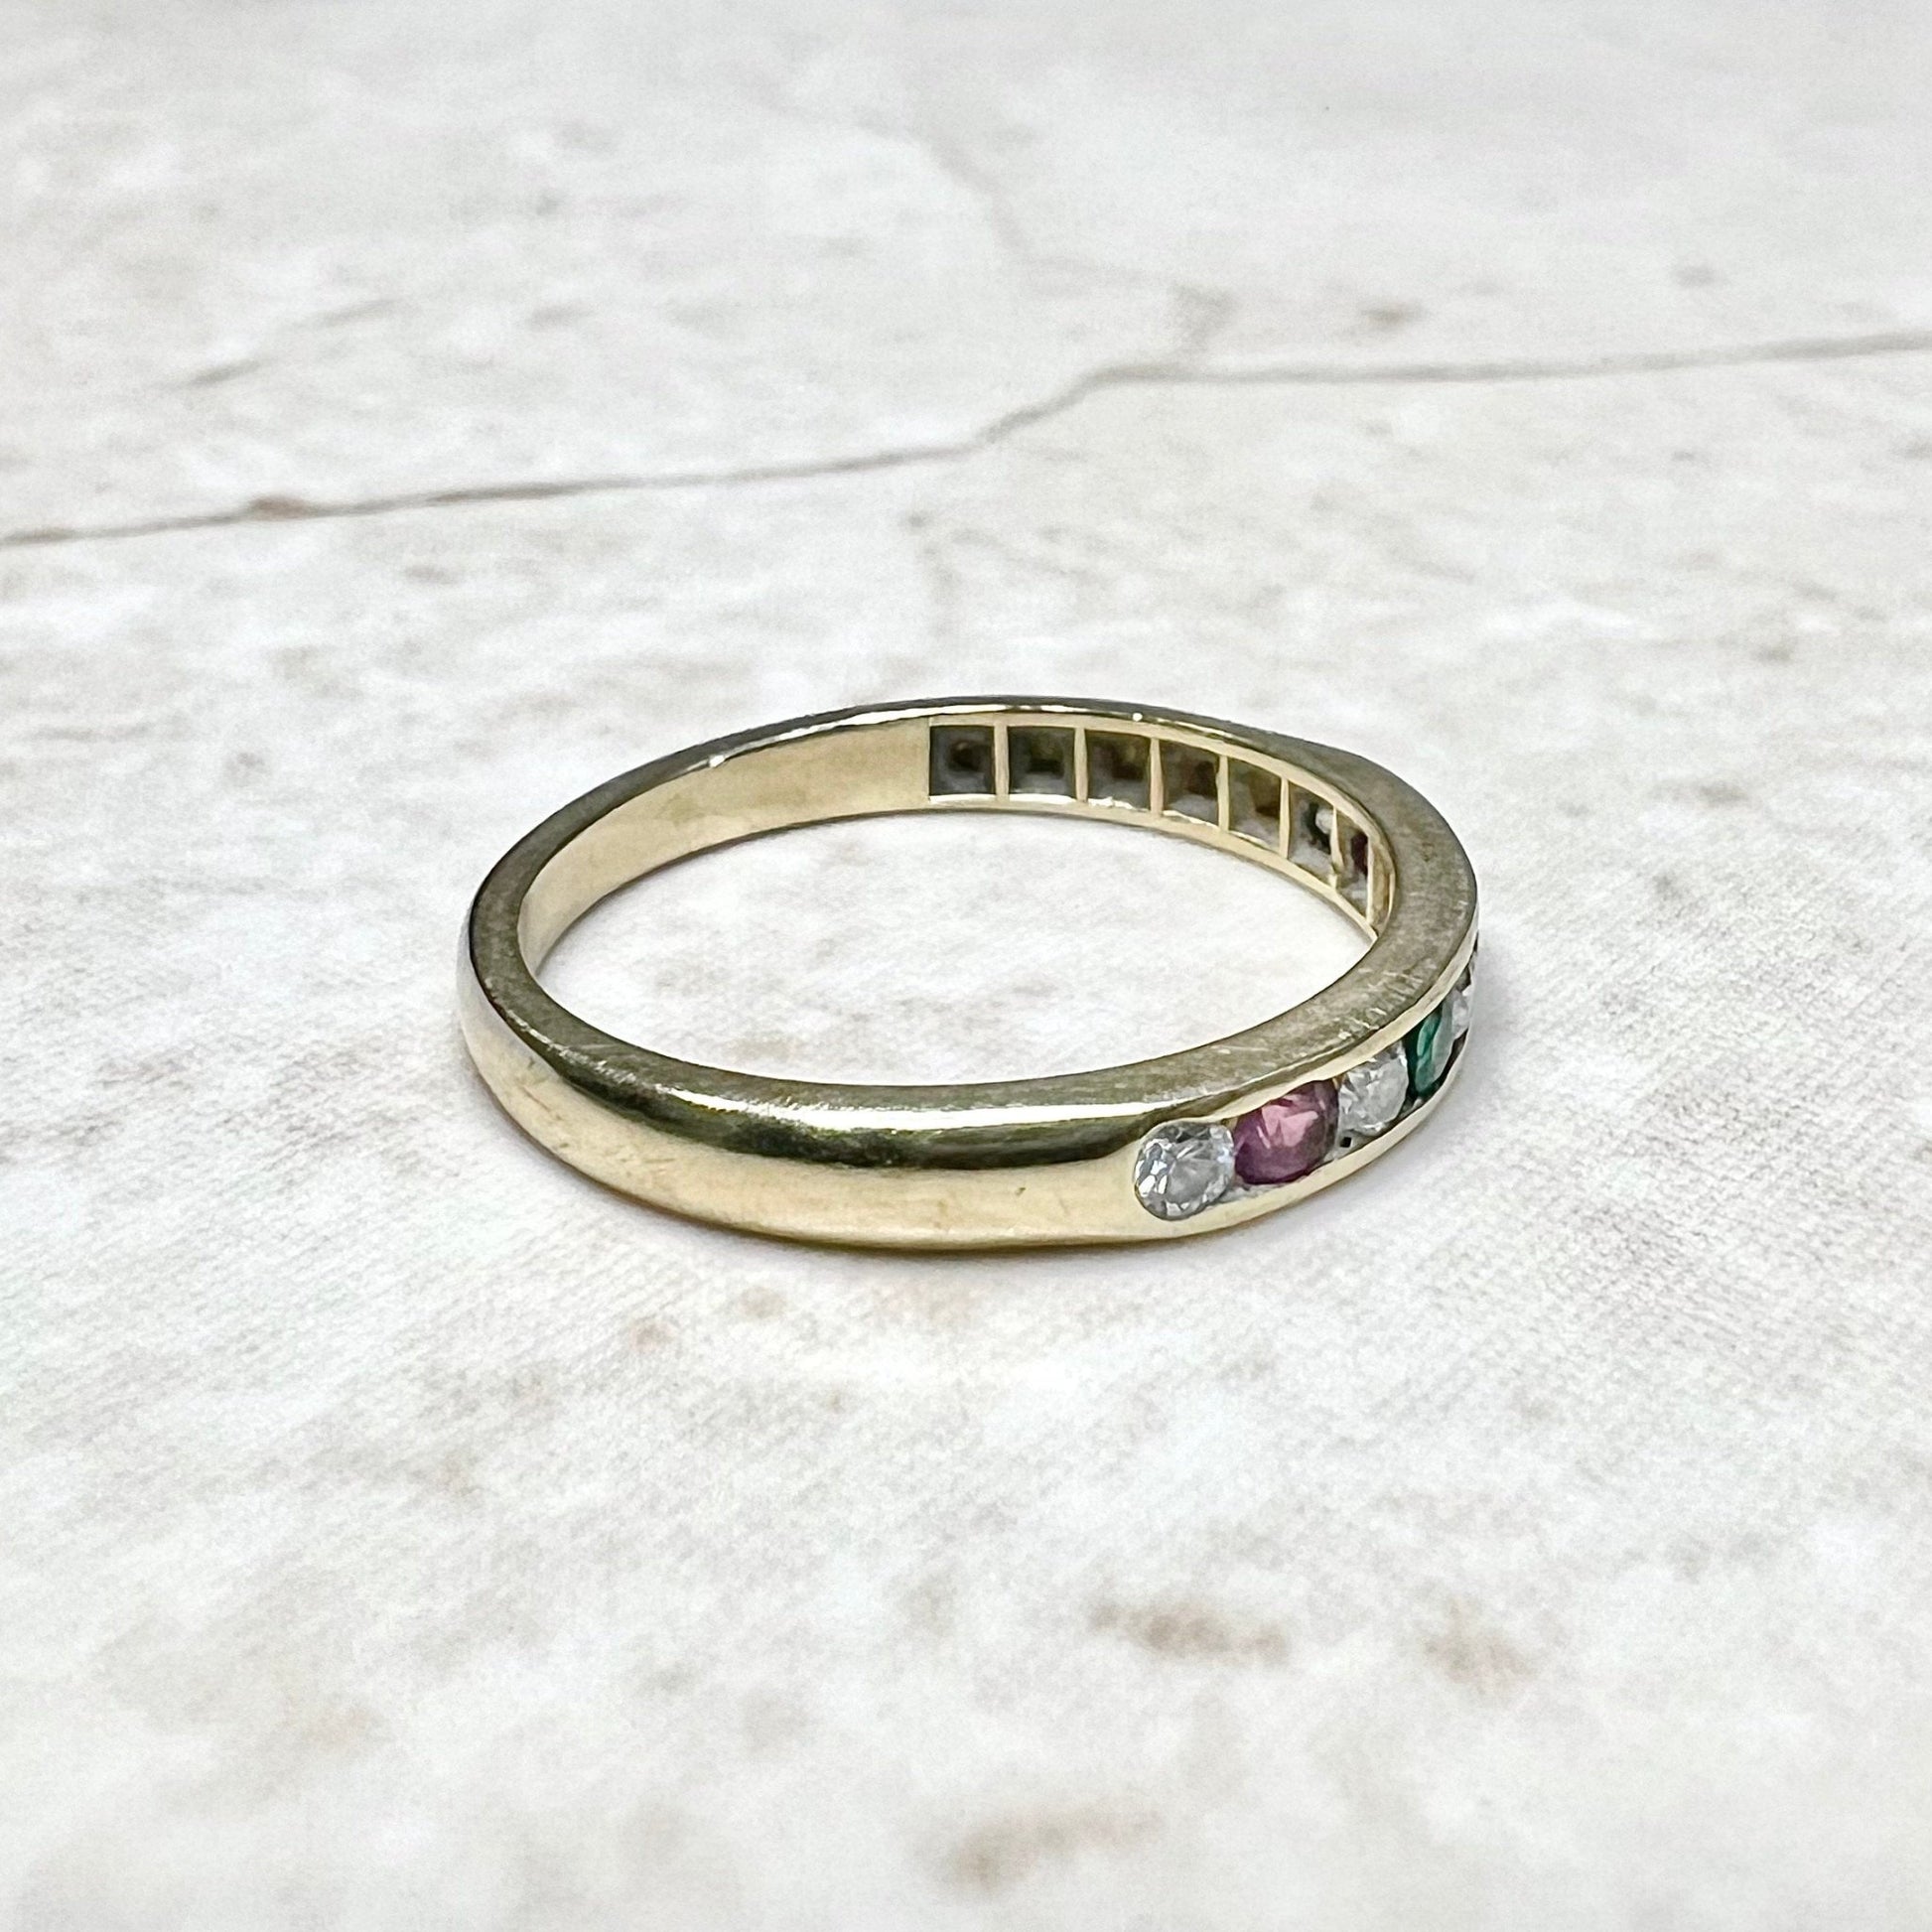 Vintage 14K Diamond, Ruby & Emerald Band Ring - Yellow Gold Diamond Band - Ruby Band - Birthstone Ring - Anniversary Ring - Gifts For Her